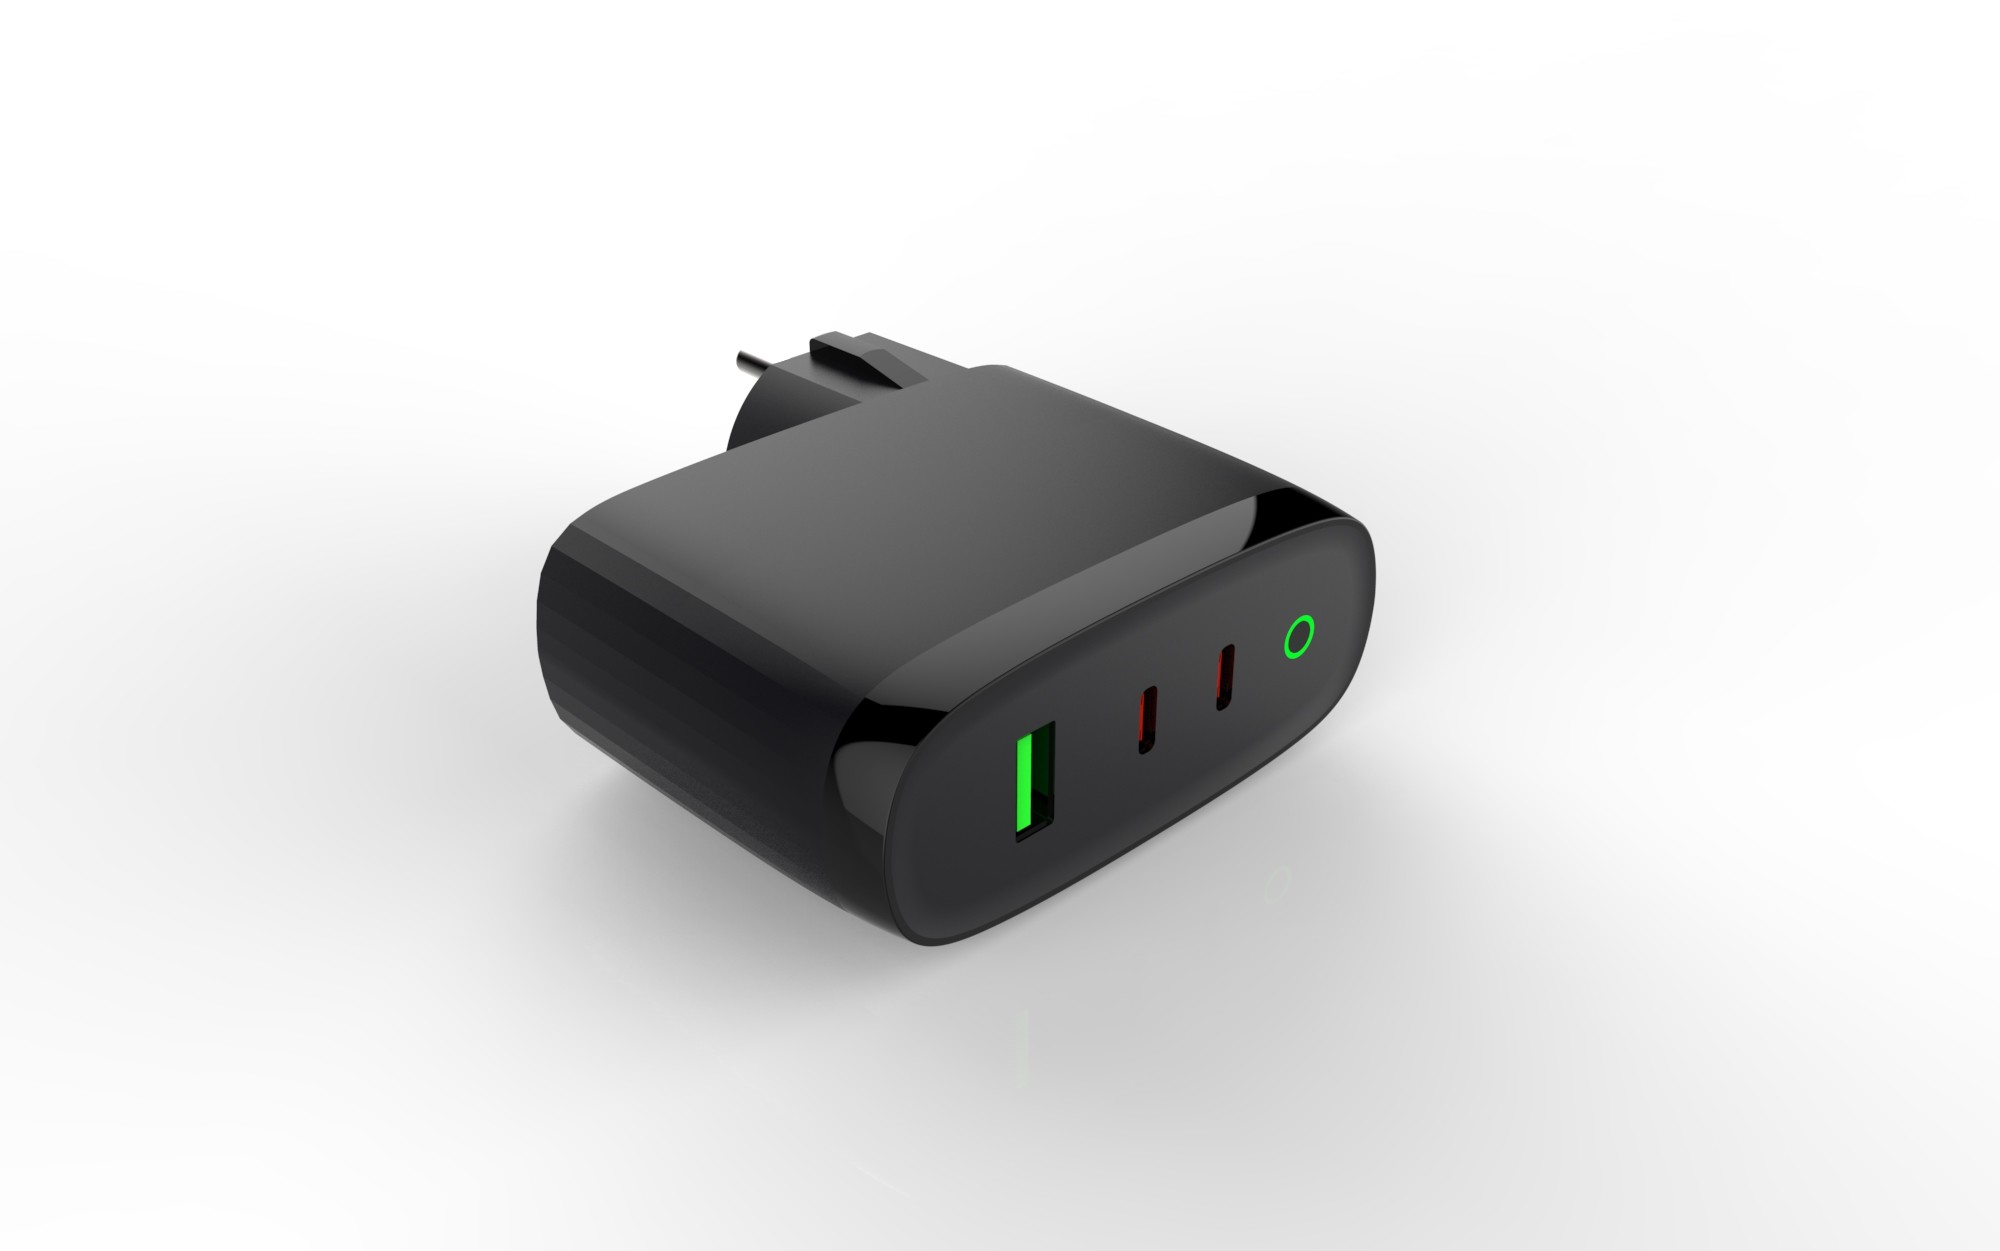  Wholesale High Quality Portable 3 USB Ports 120W GaN Phone Travel Quick Wall Charger Manufactures